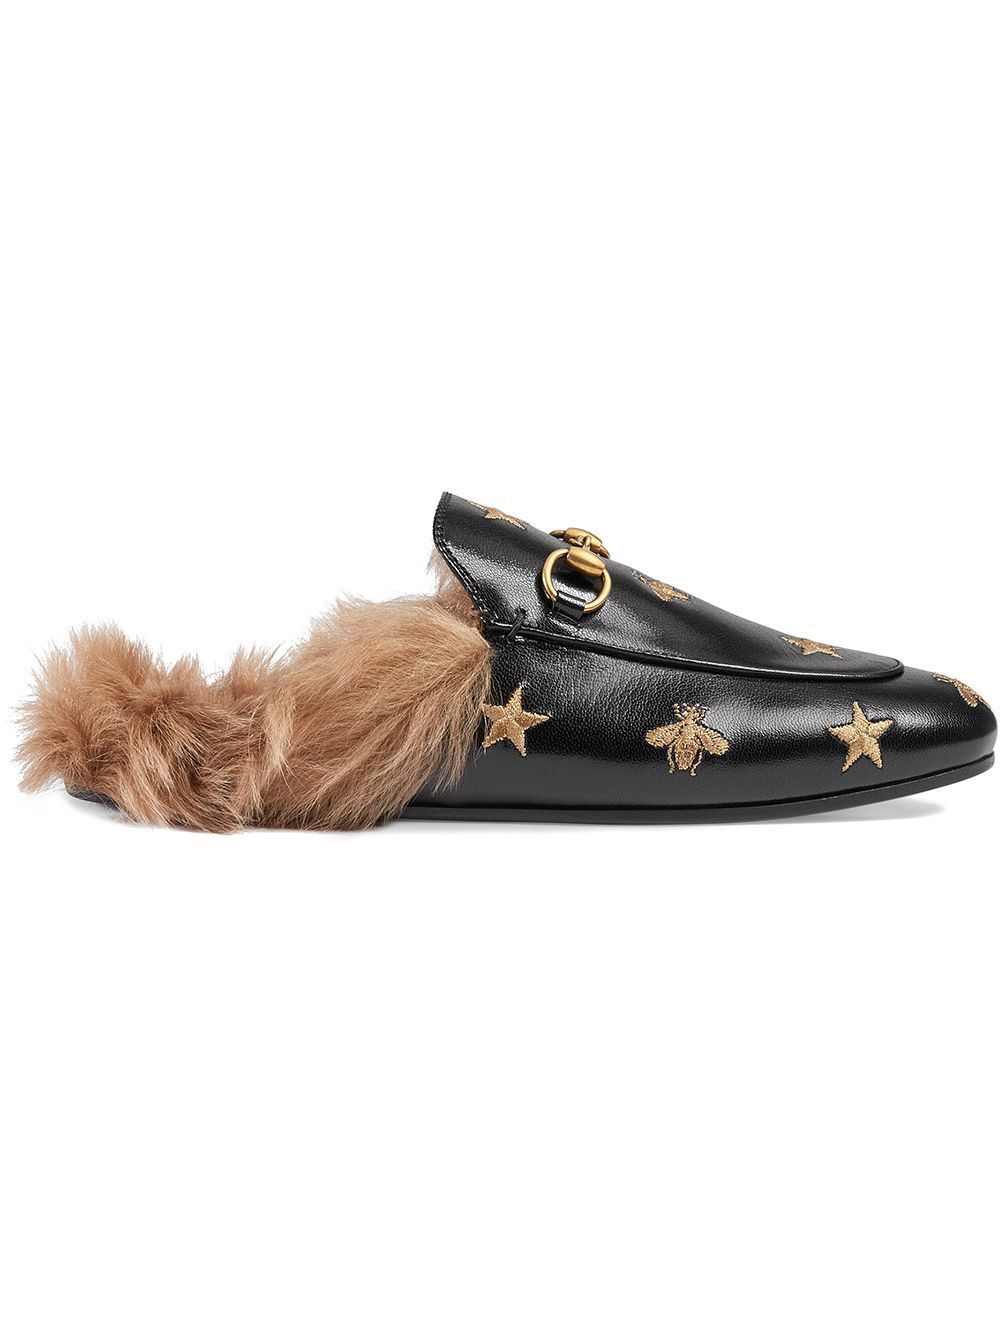 Gucci Princetown embroidered leather mules - Black | FarFetch Global